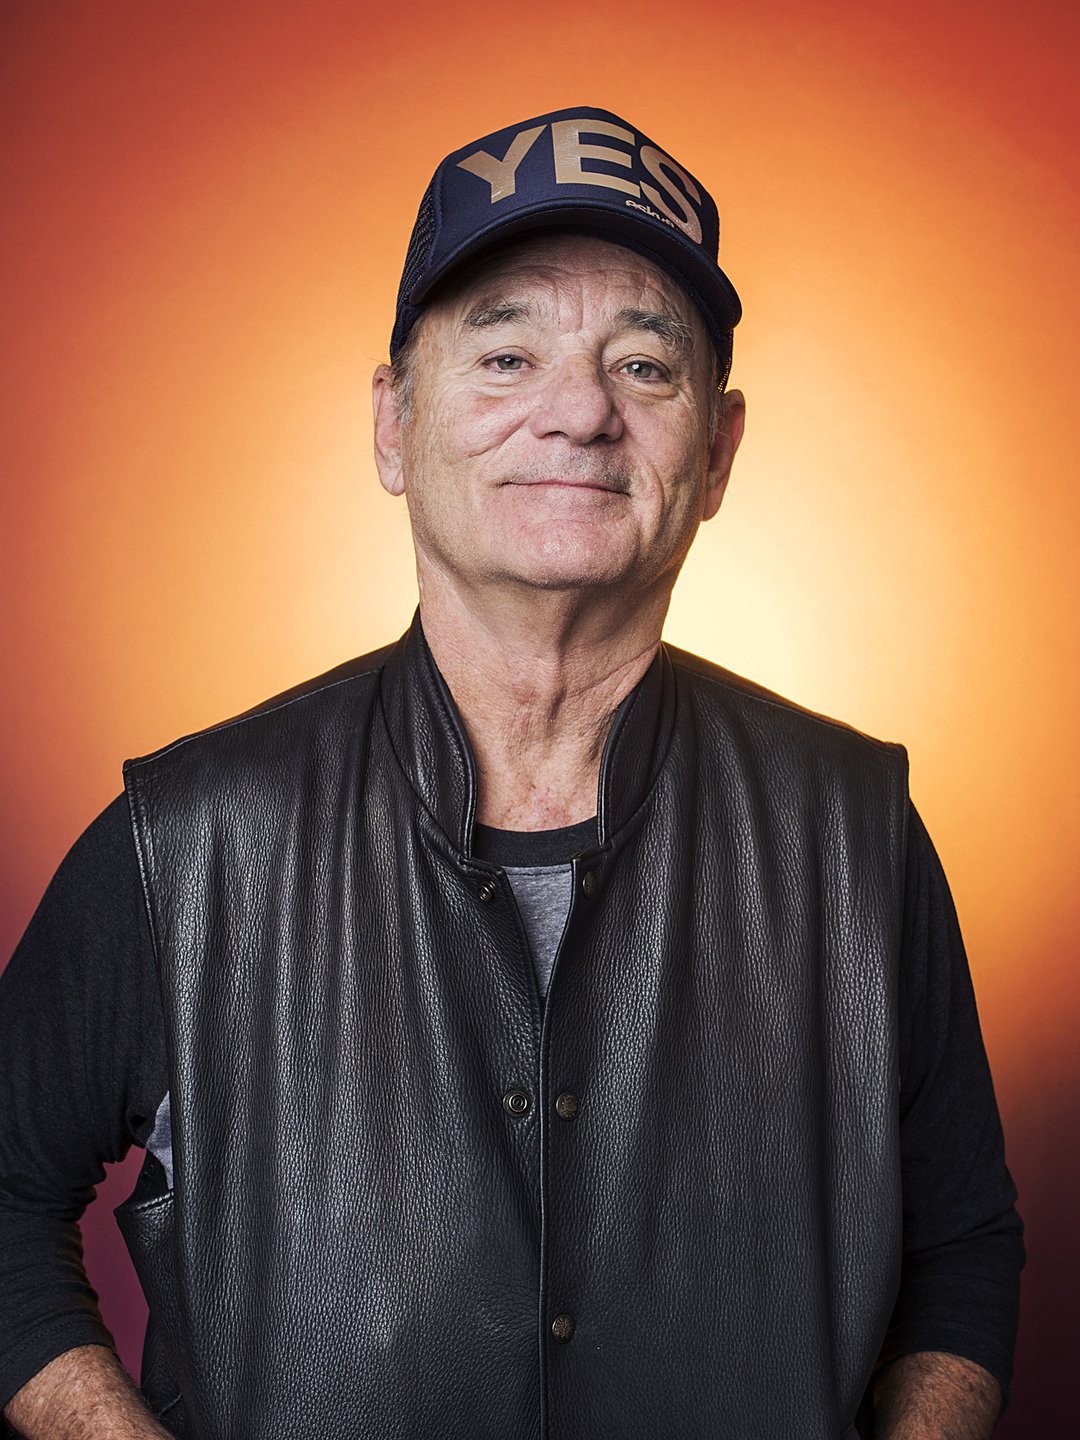 Bill Murray in real life